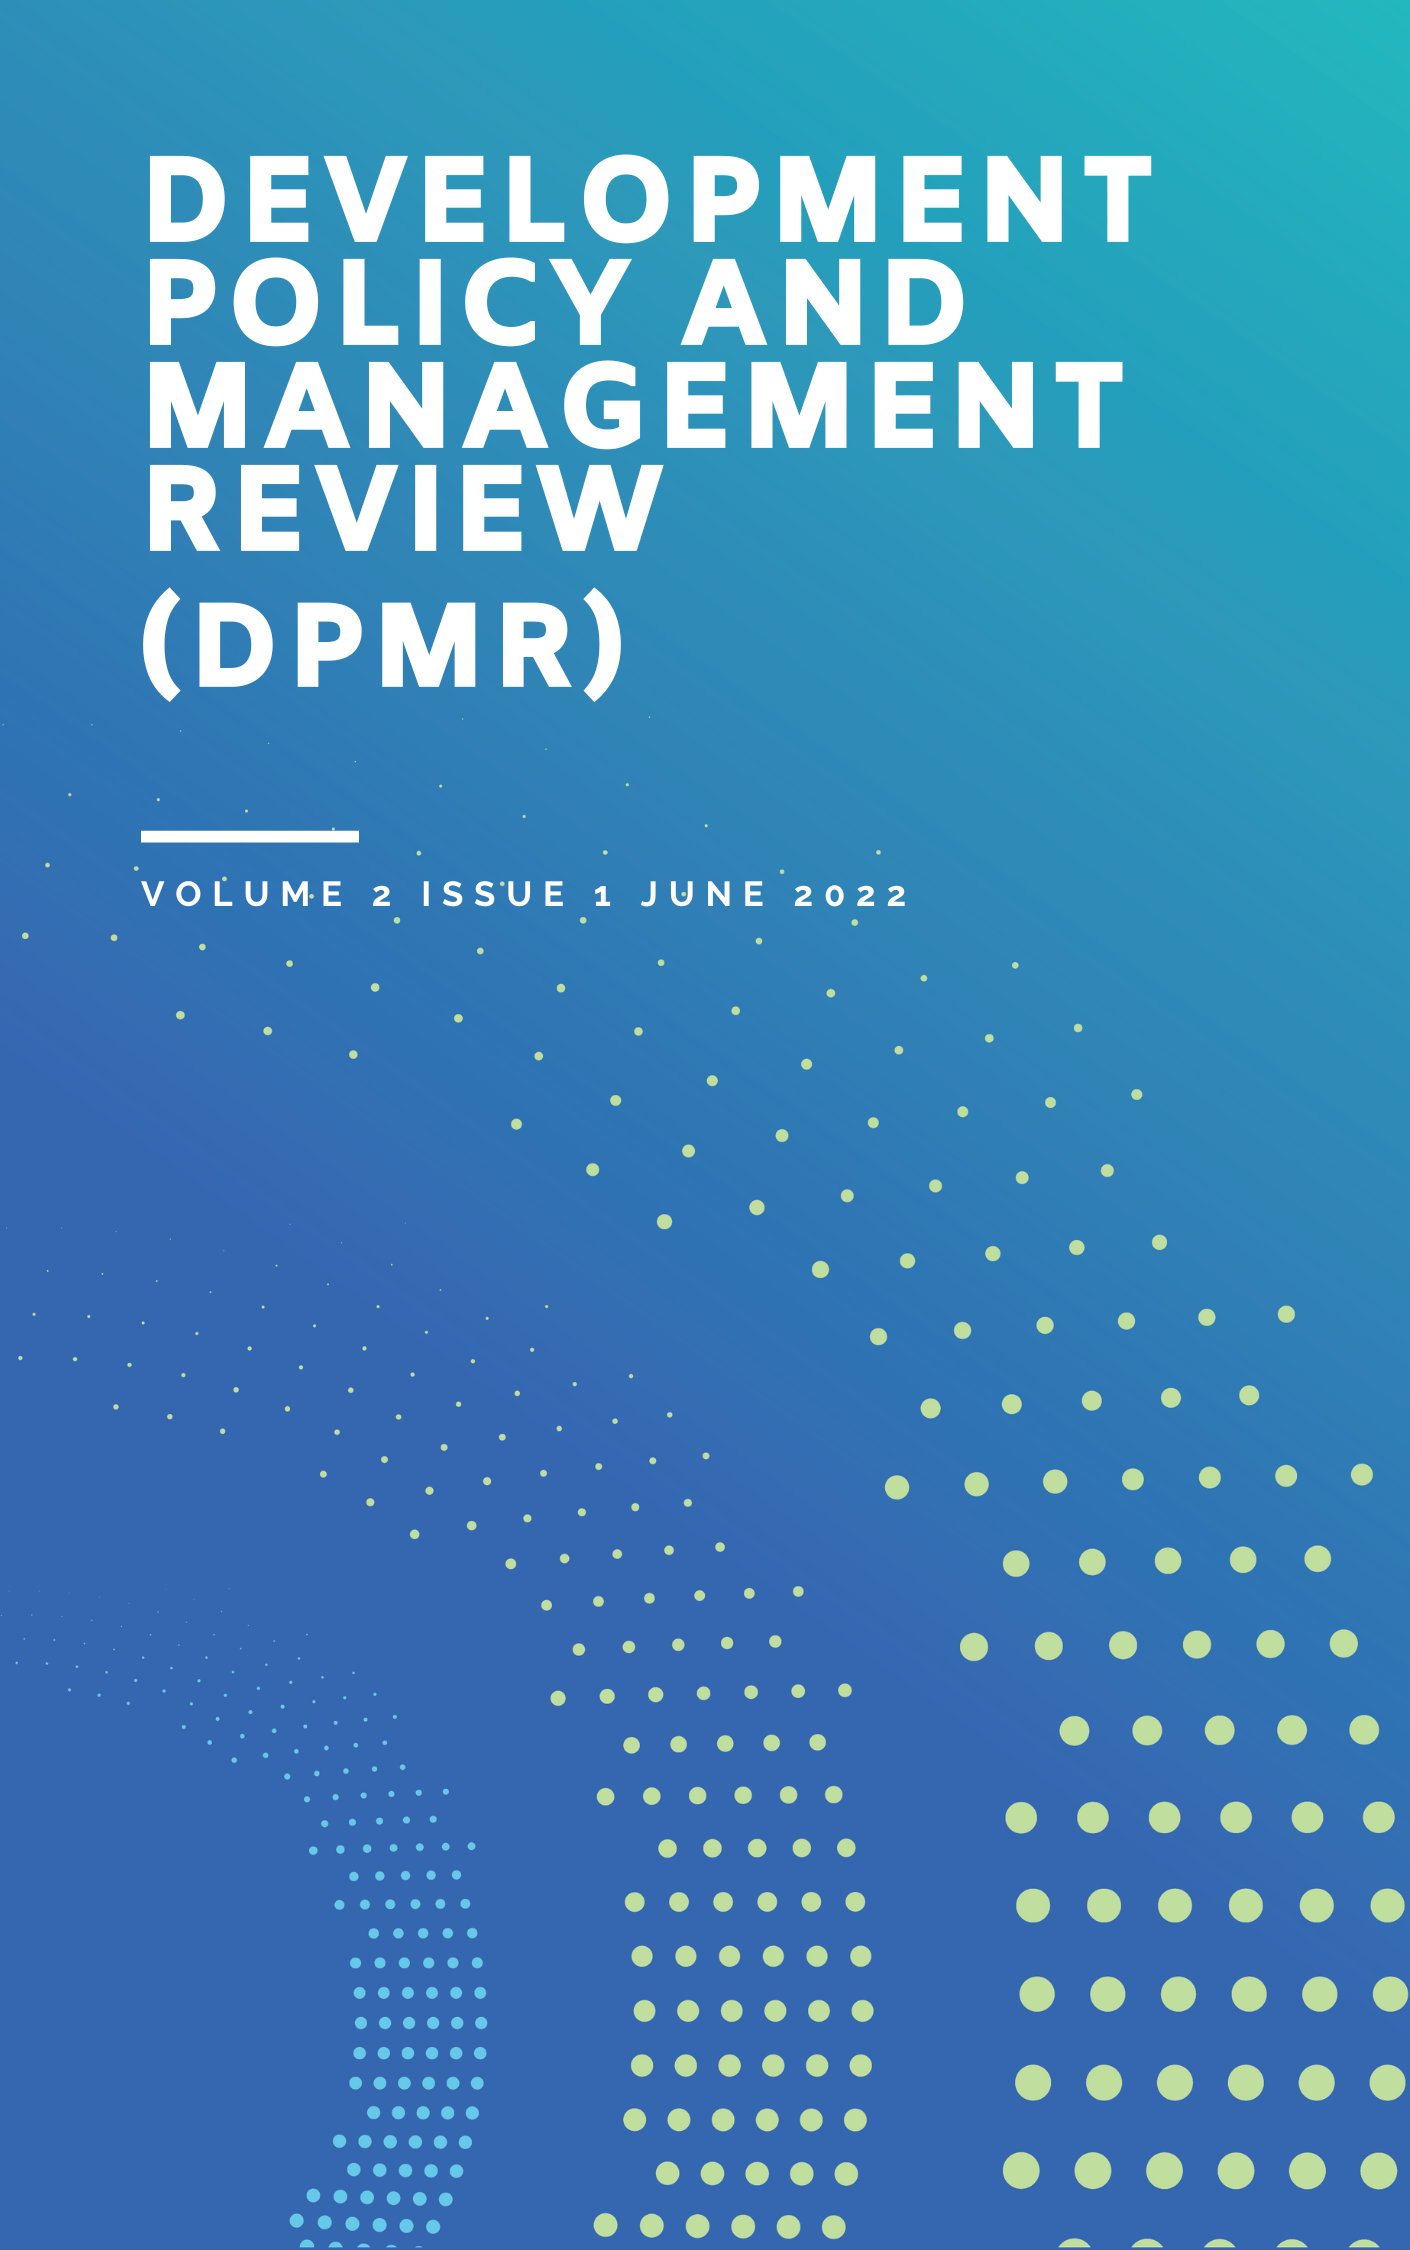 					View Volume 2 Issue 1 June 2022
				